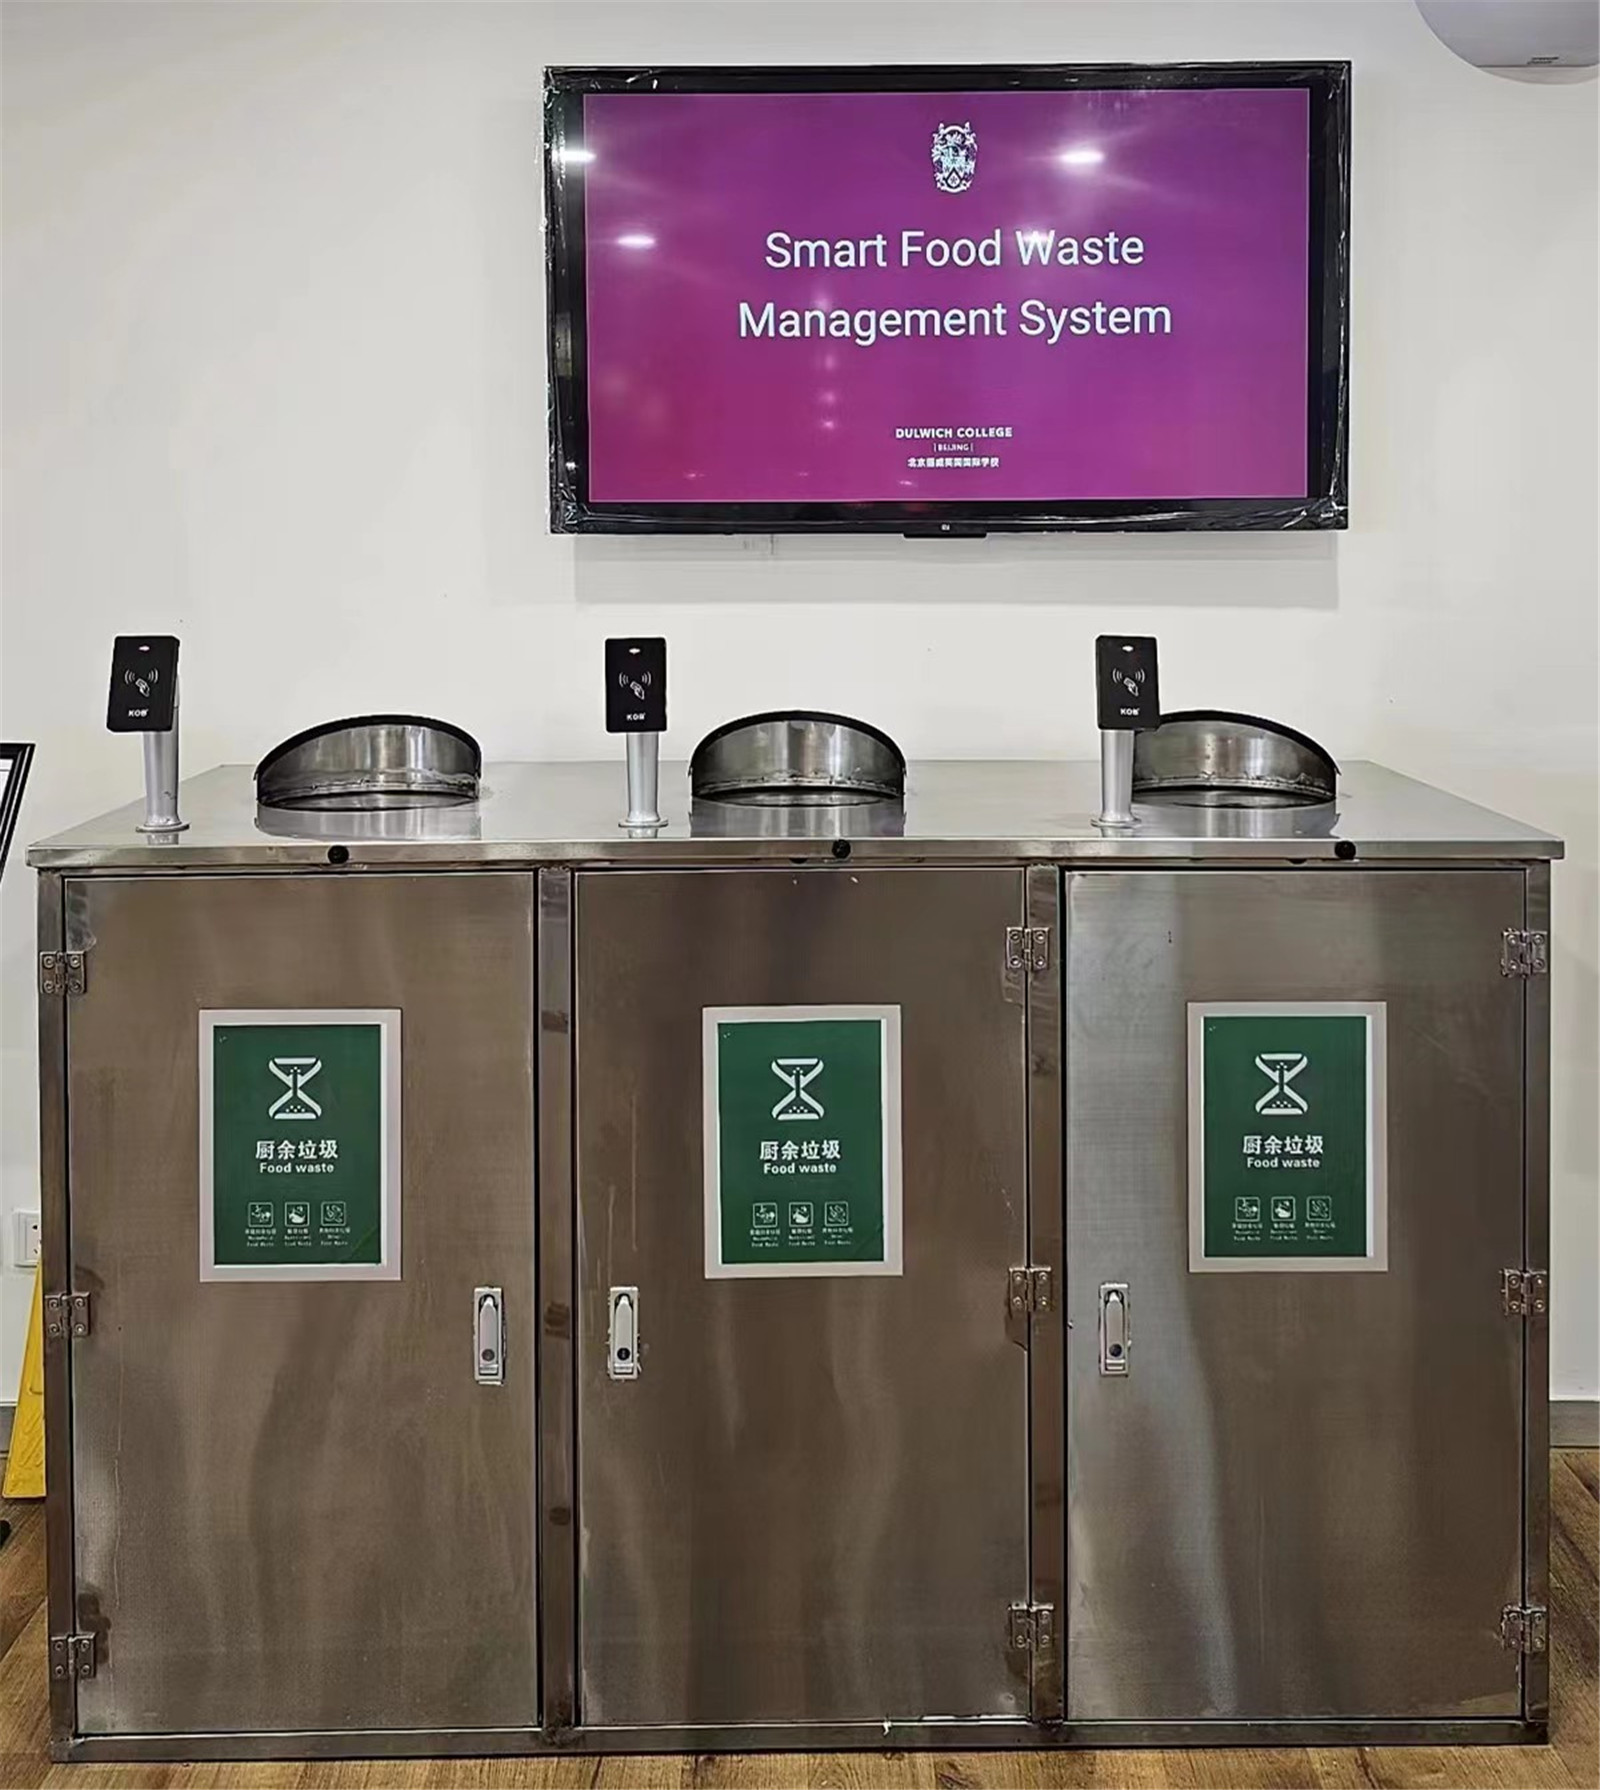 Food bins with the food waste management system installed